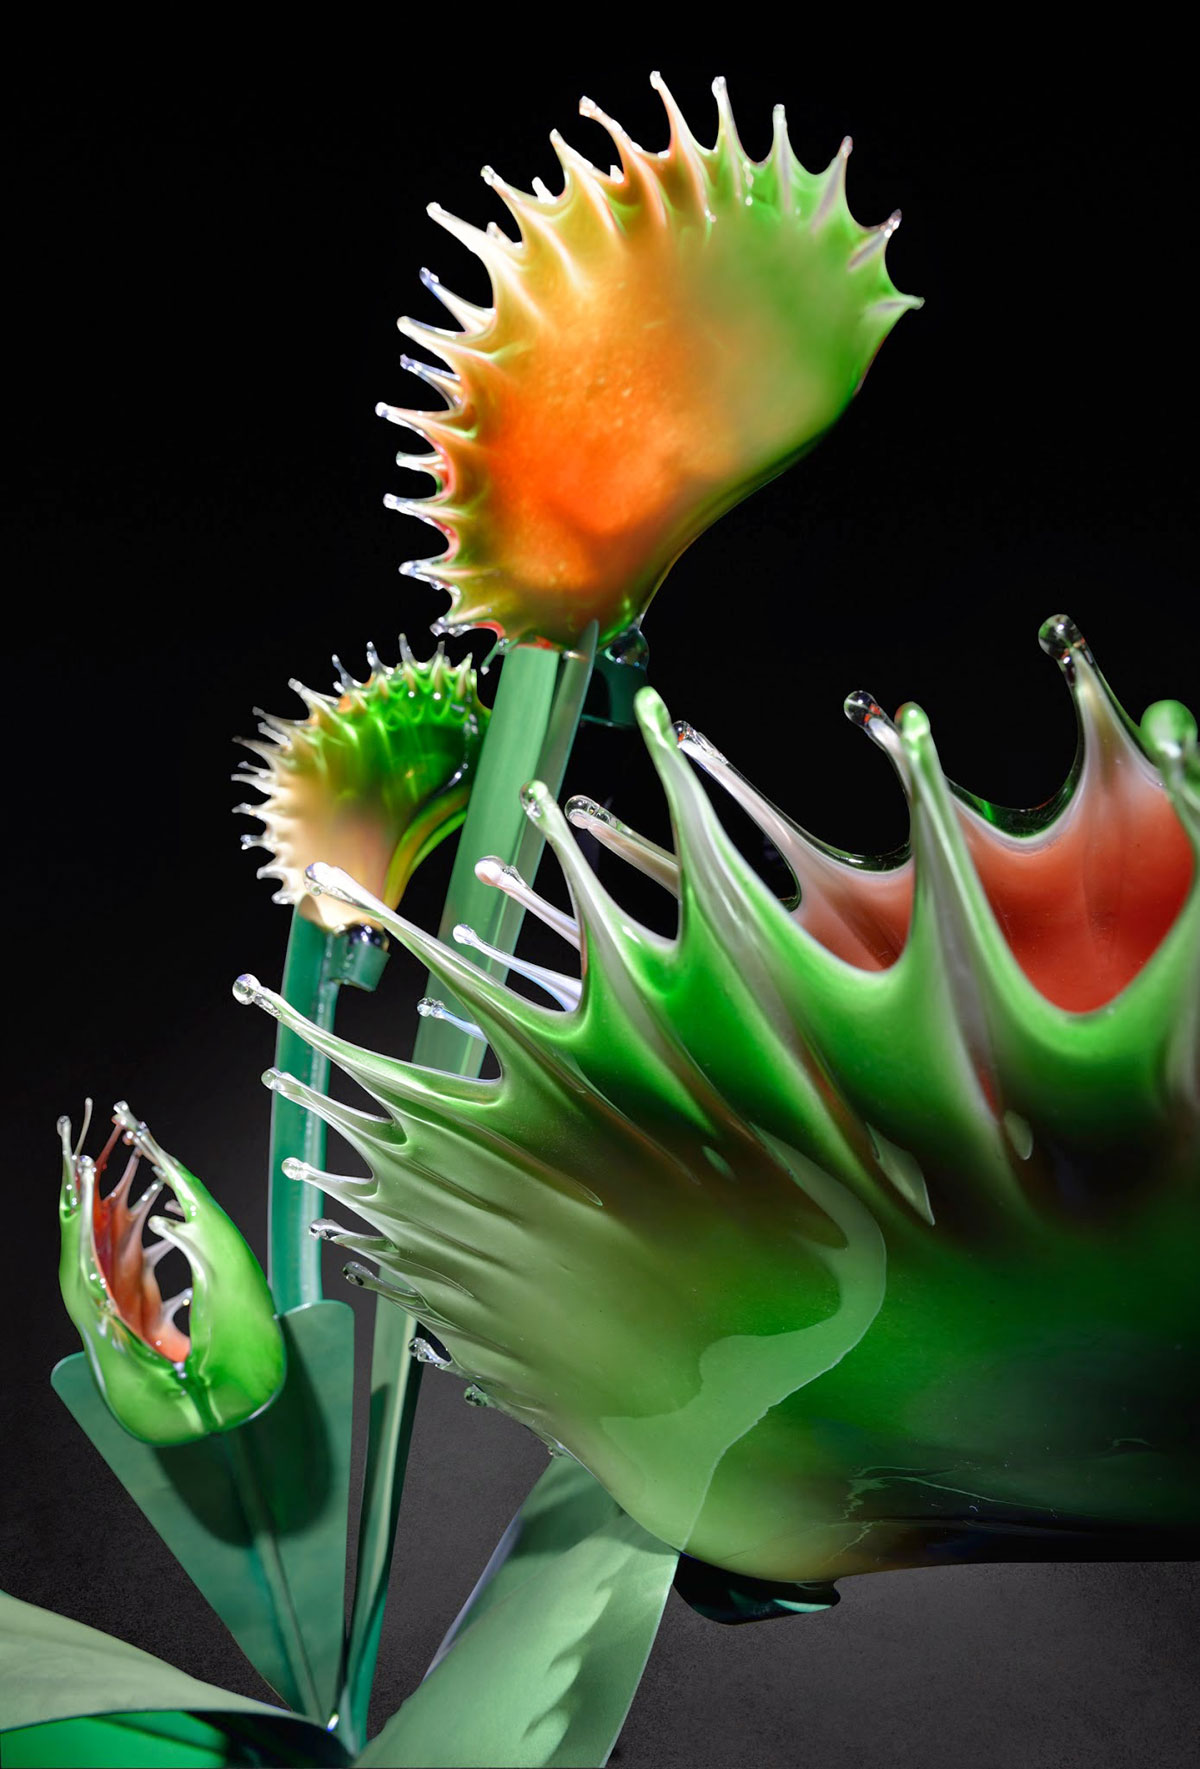 Gigantic And Realistic Flower Sculptures Made From Glass -5